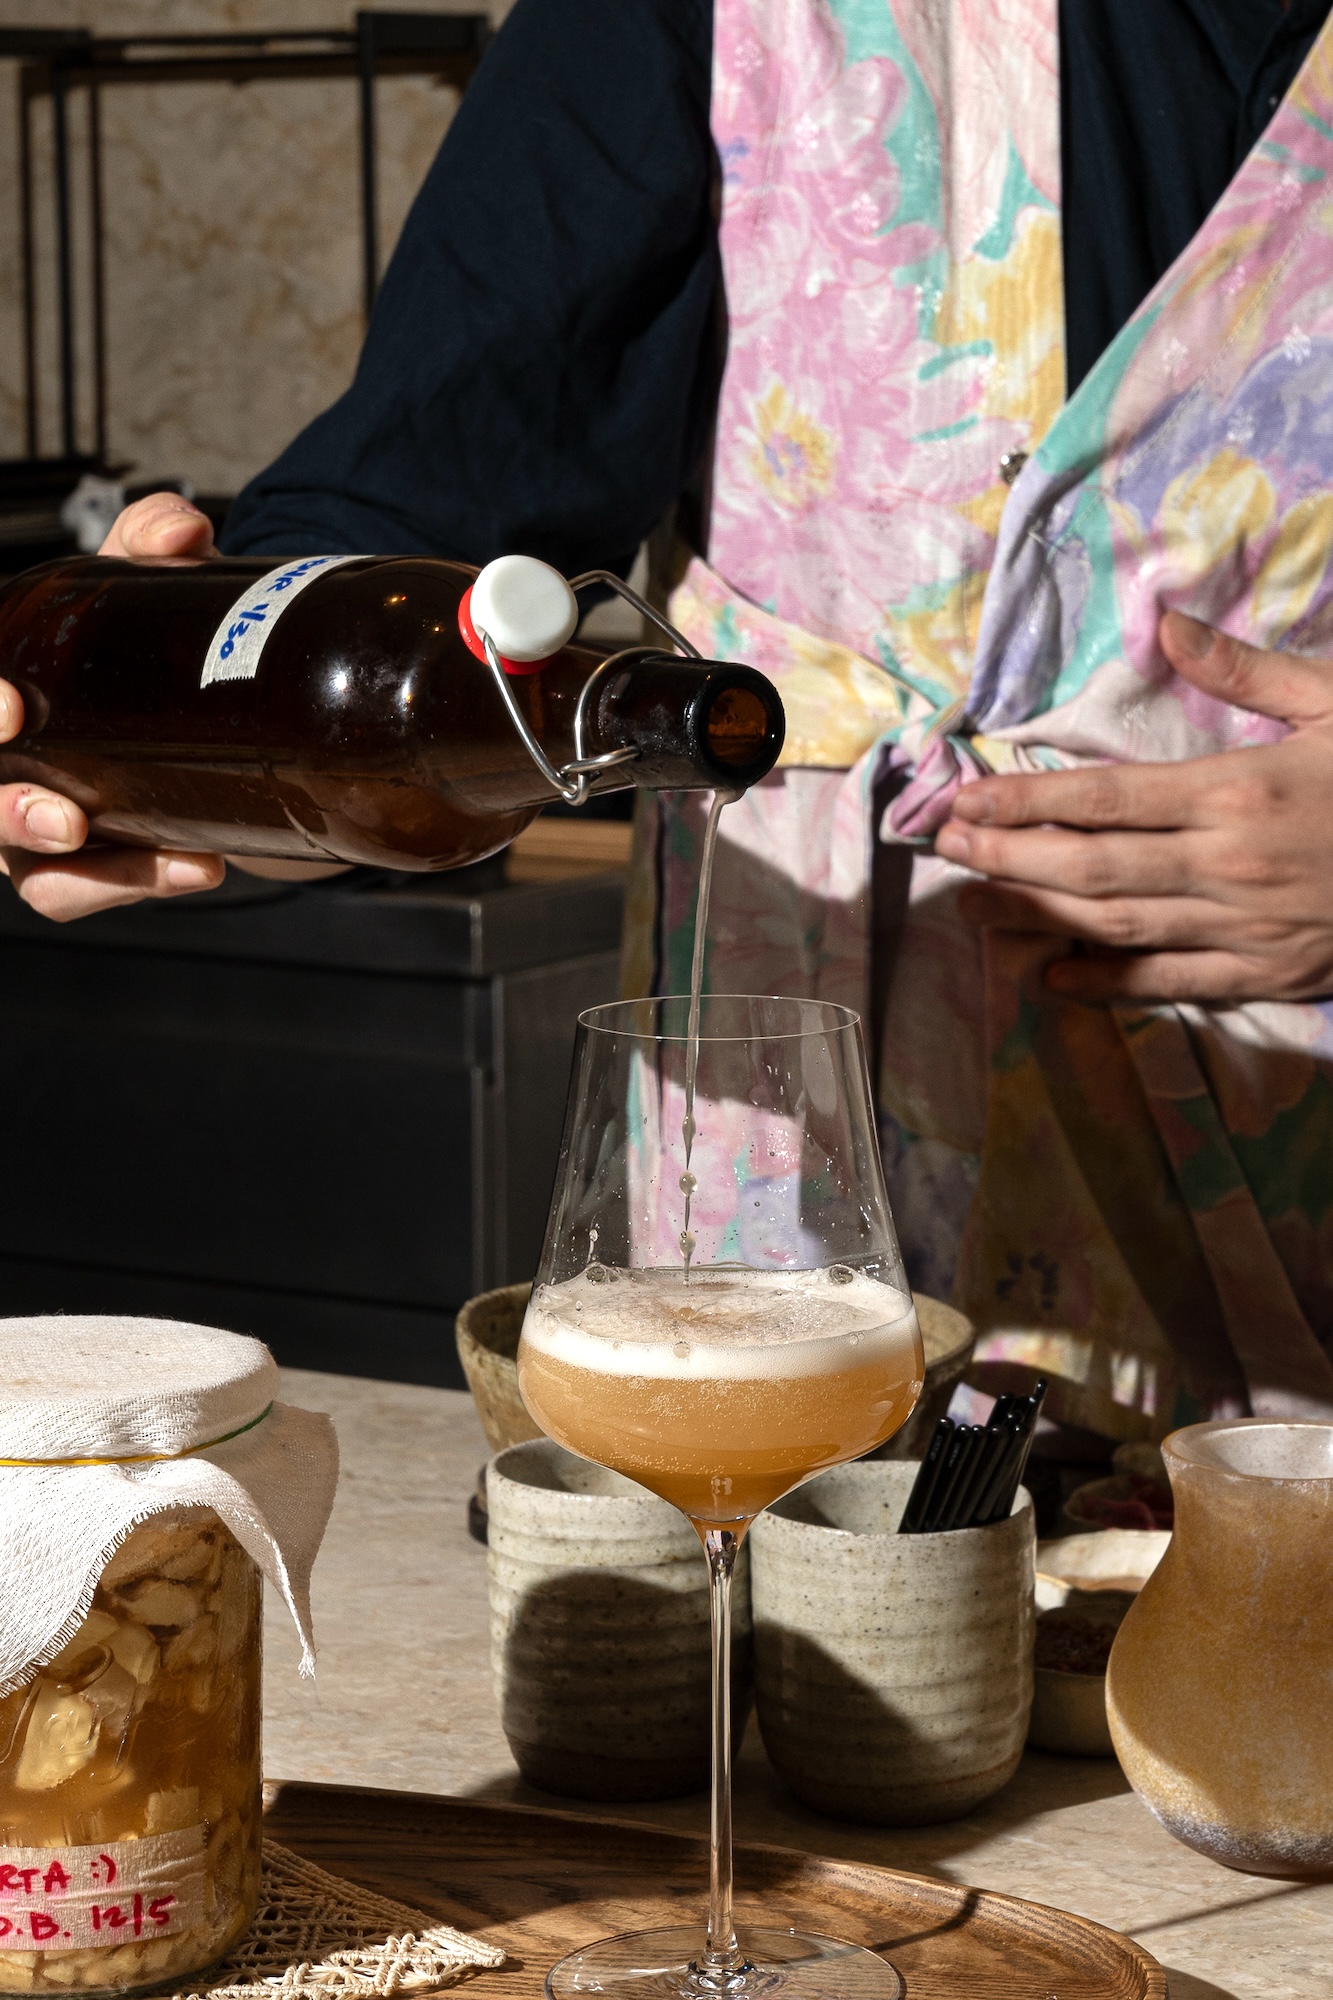 The Ginger Beer ni Roberta is a homemade ginger beer brew by Inatô's manager, Paulo Achacoso. The smooth, bubbly drink's fermentation takes place in house and is named after the culture used to make it